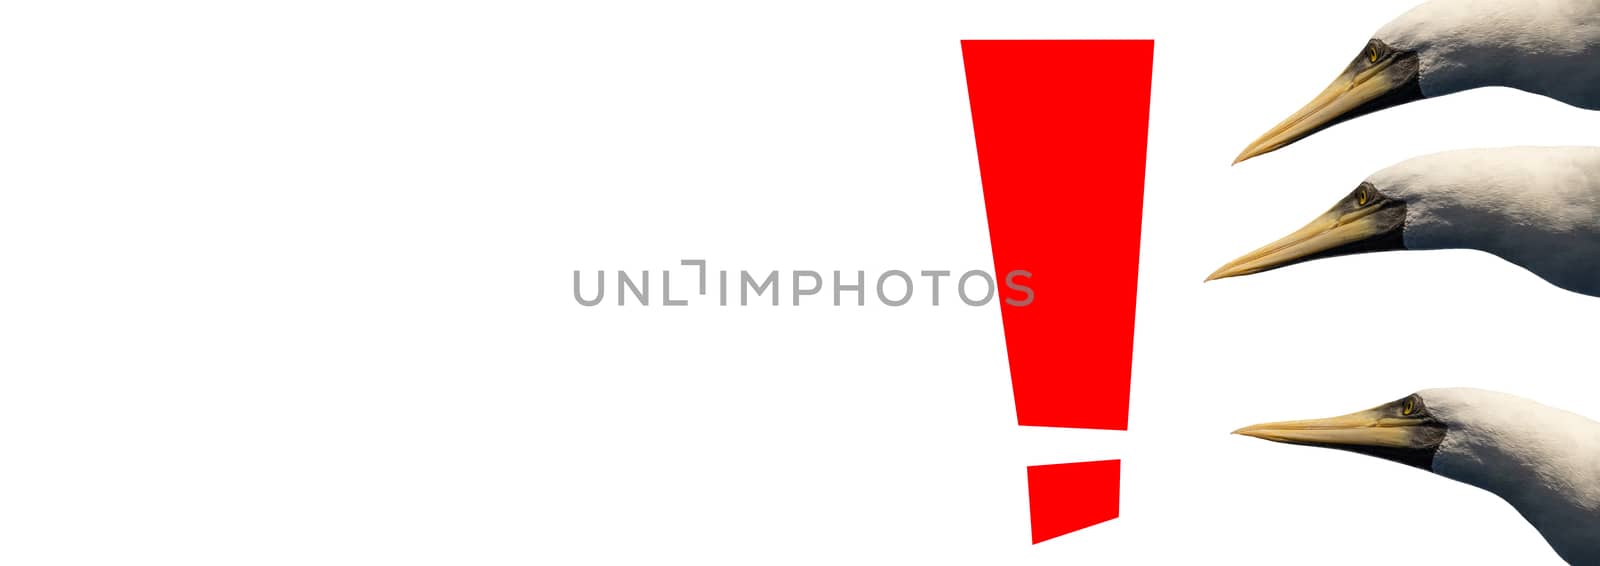 Exclamation mark in red color on white background with three birds looking at it. Isolated. Blank space on the left part of the image.